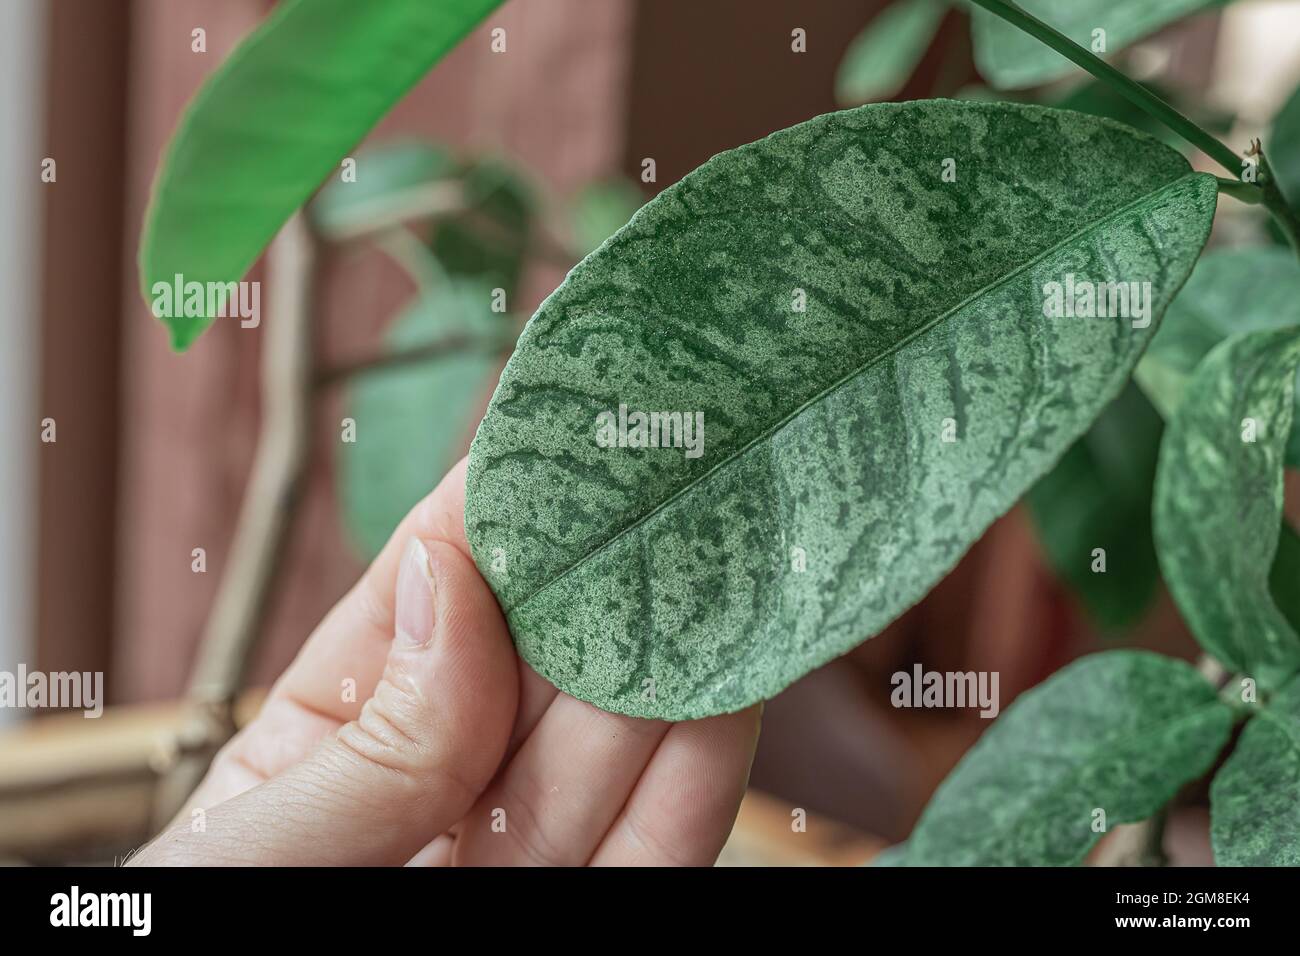 Lemon tree leaf infected with a virus or chlorosis disease Stock Photo